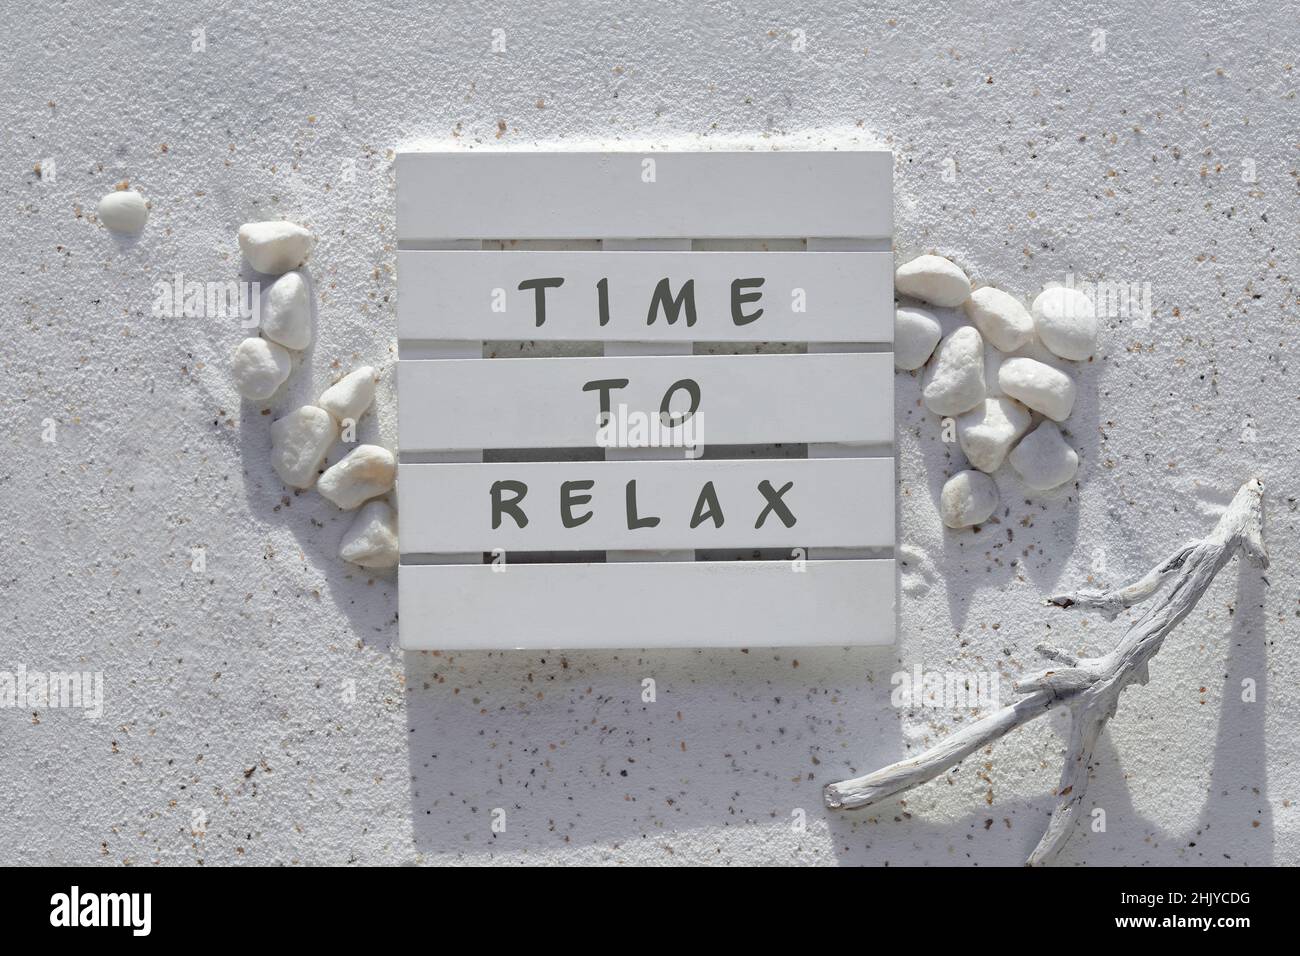 Sand and sea background. Text time to relax. White sand with pebbles and driftwood. Stock Photo